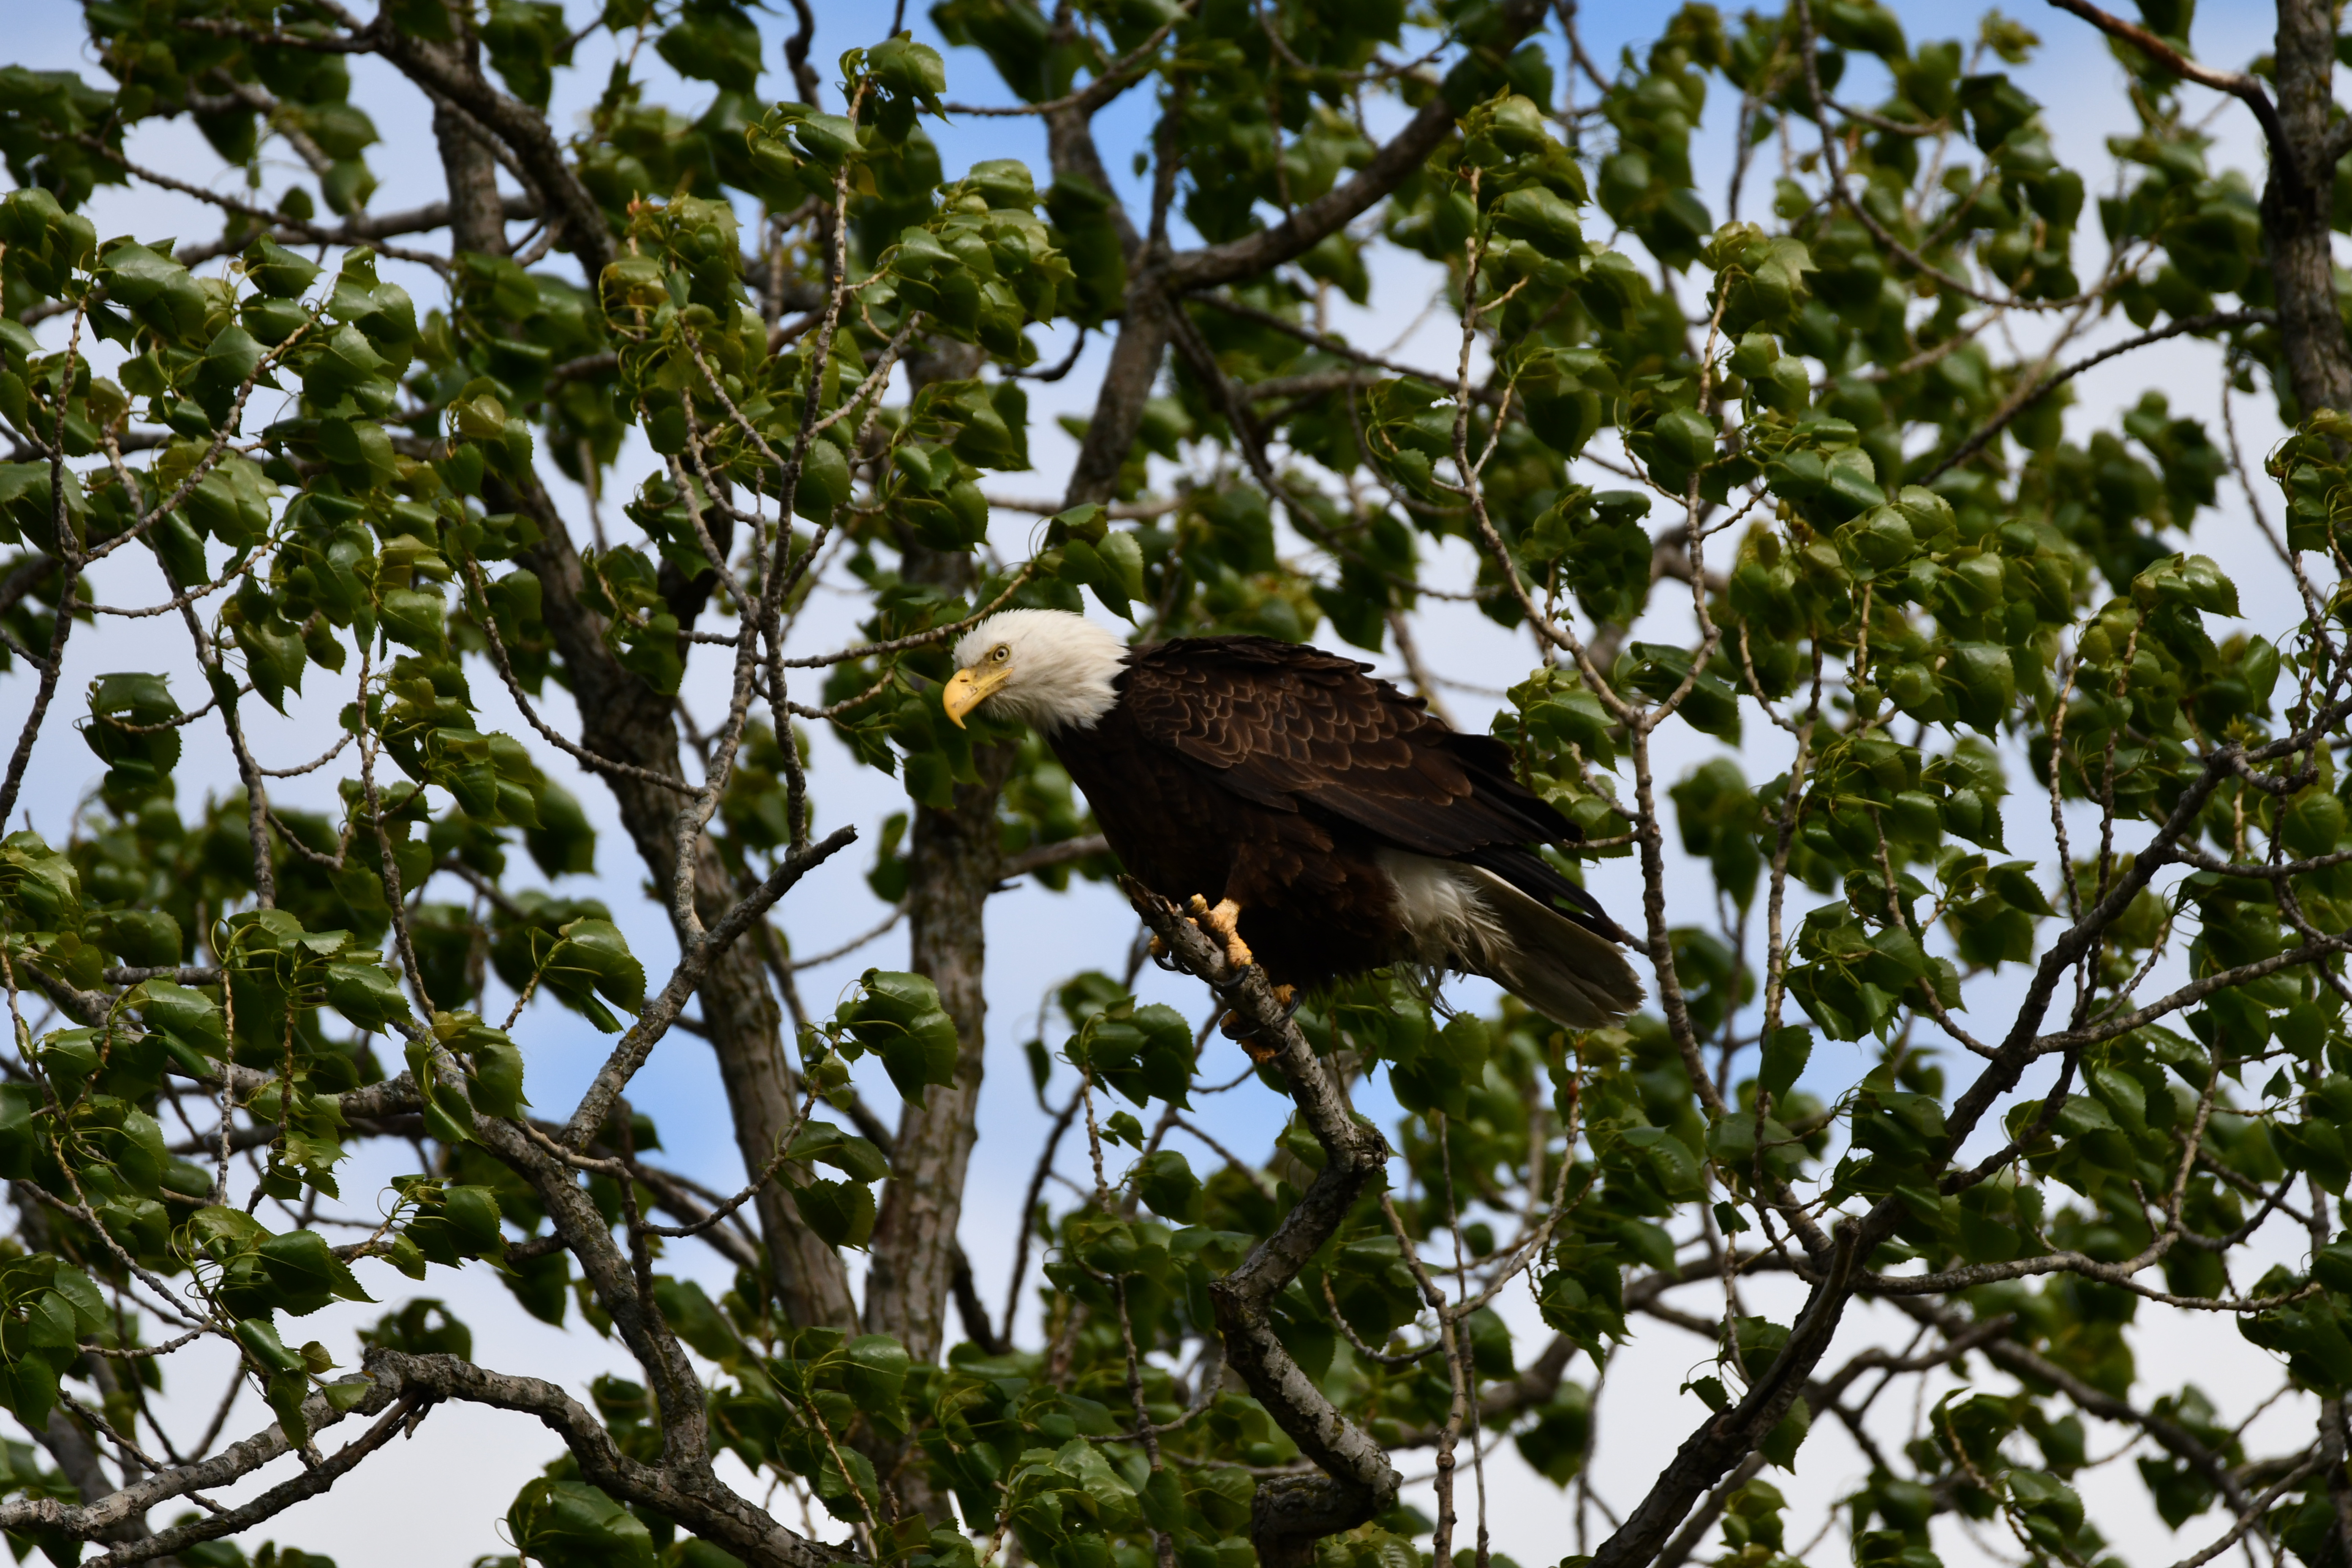 A bald eagle perching in a tree.